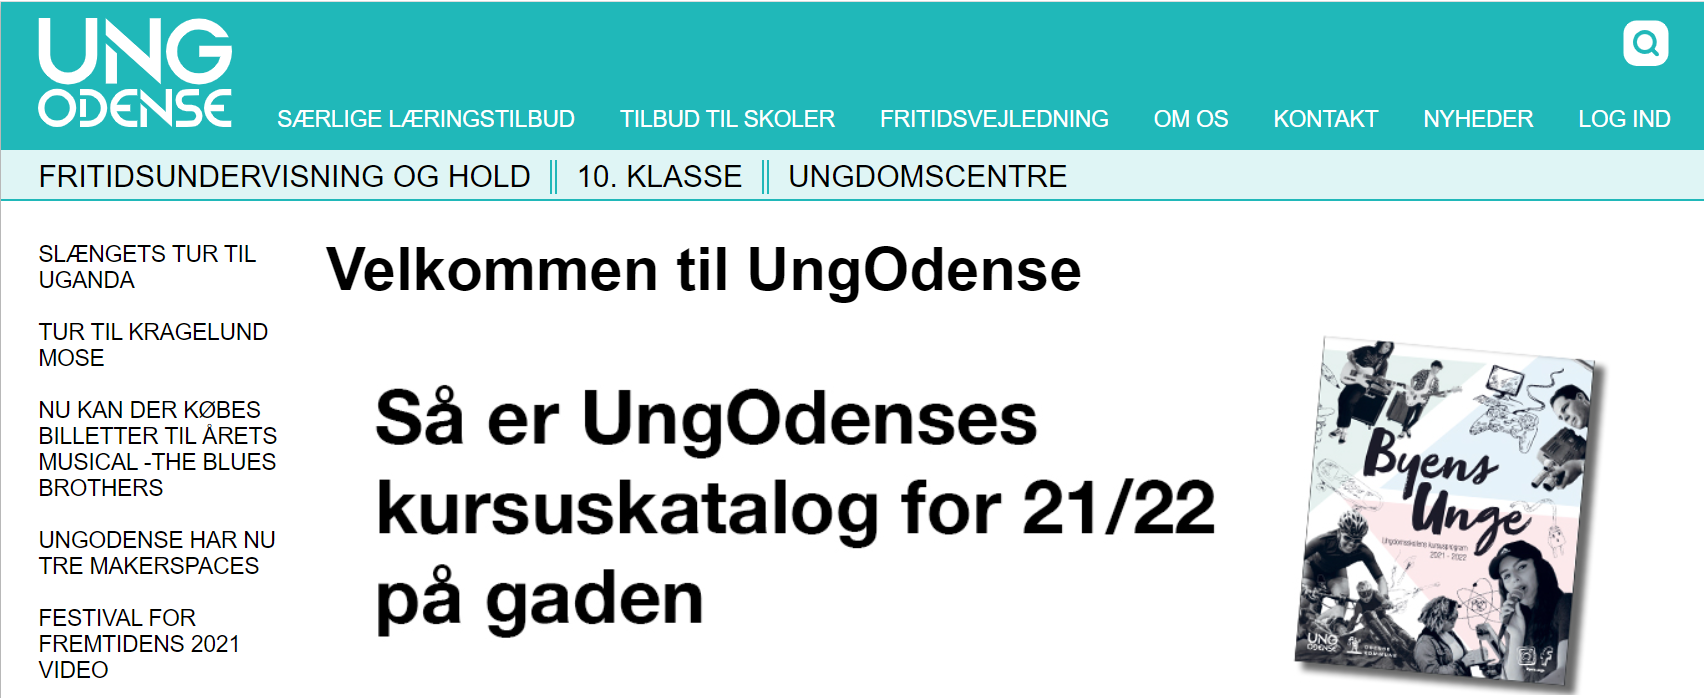 Ung Odense